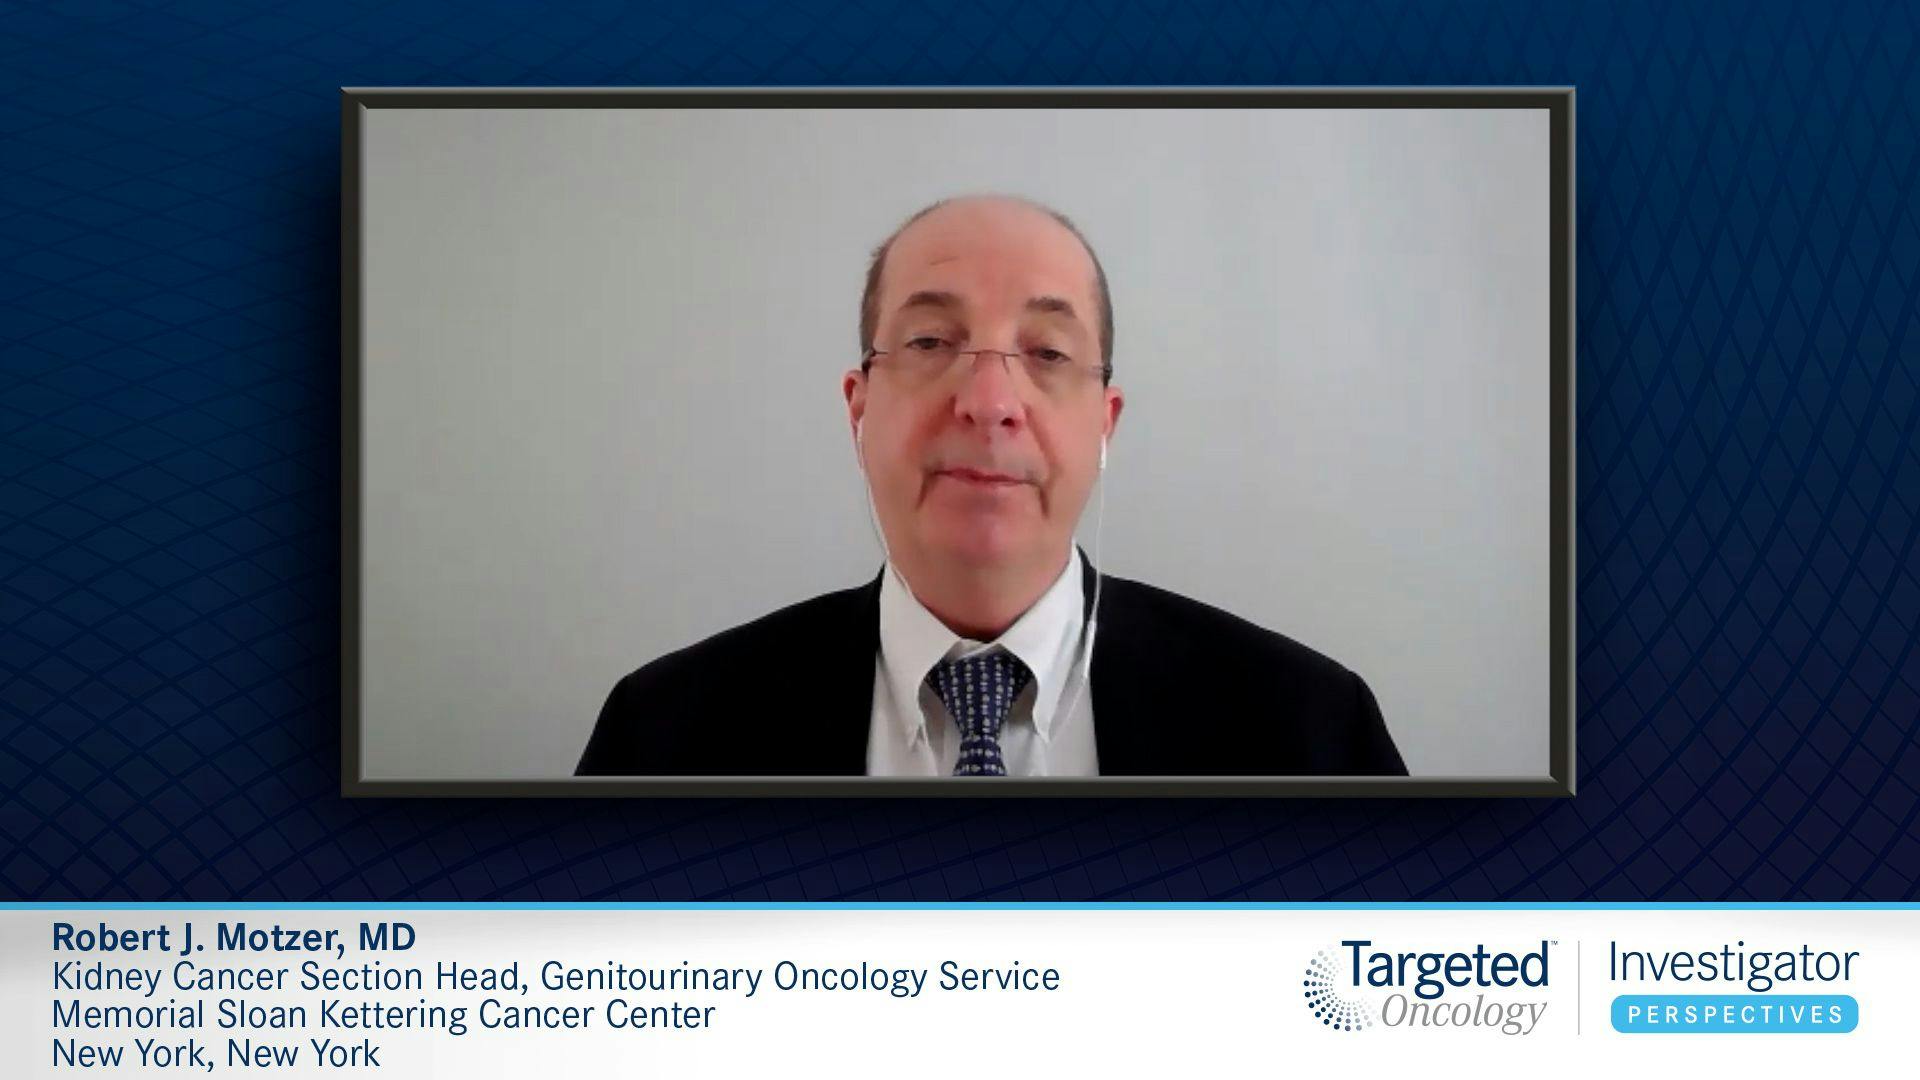 Current Therapies for Advanced RCC: Options and Challenges